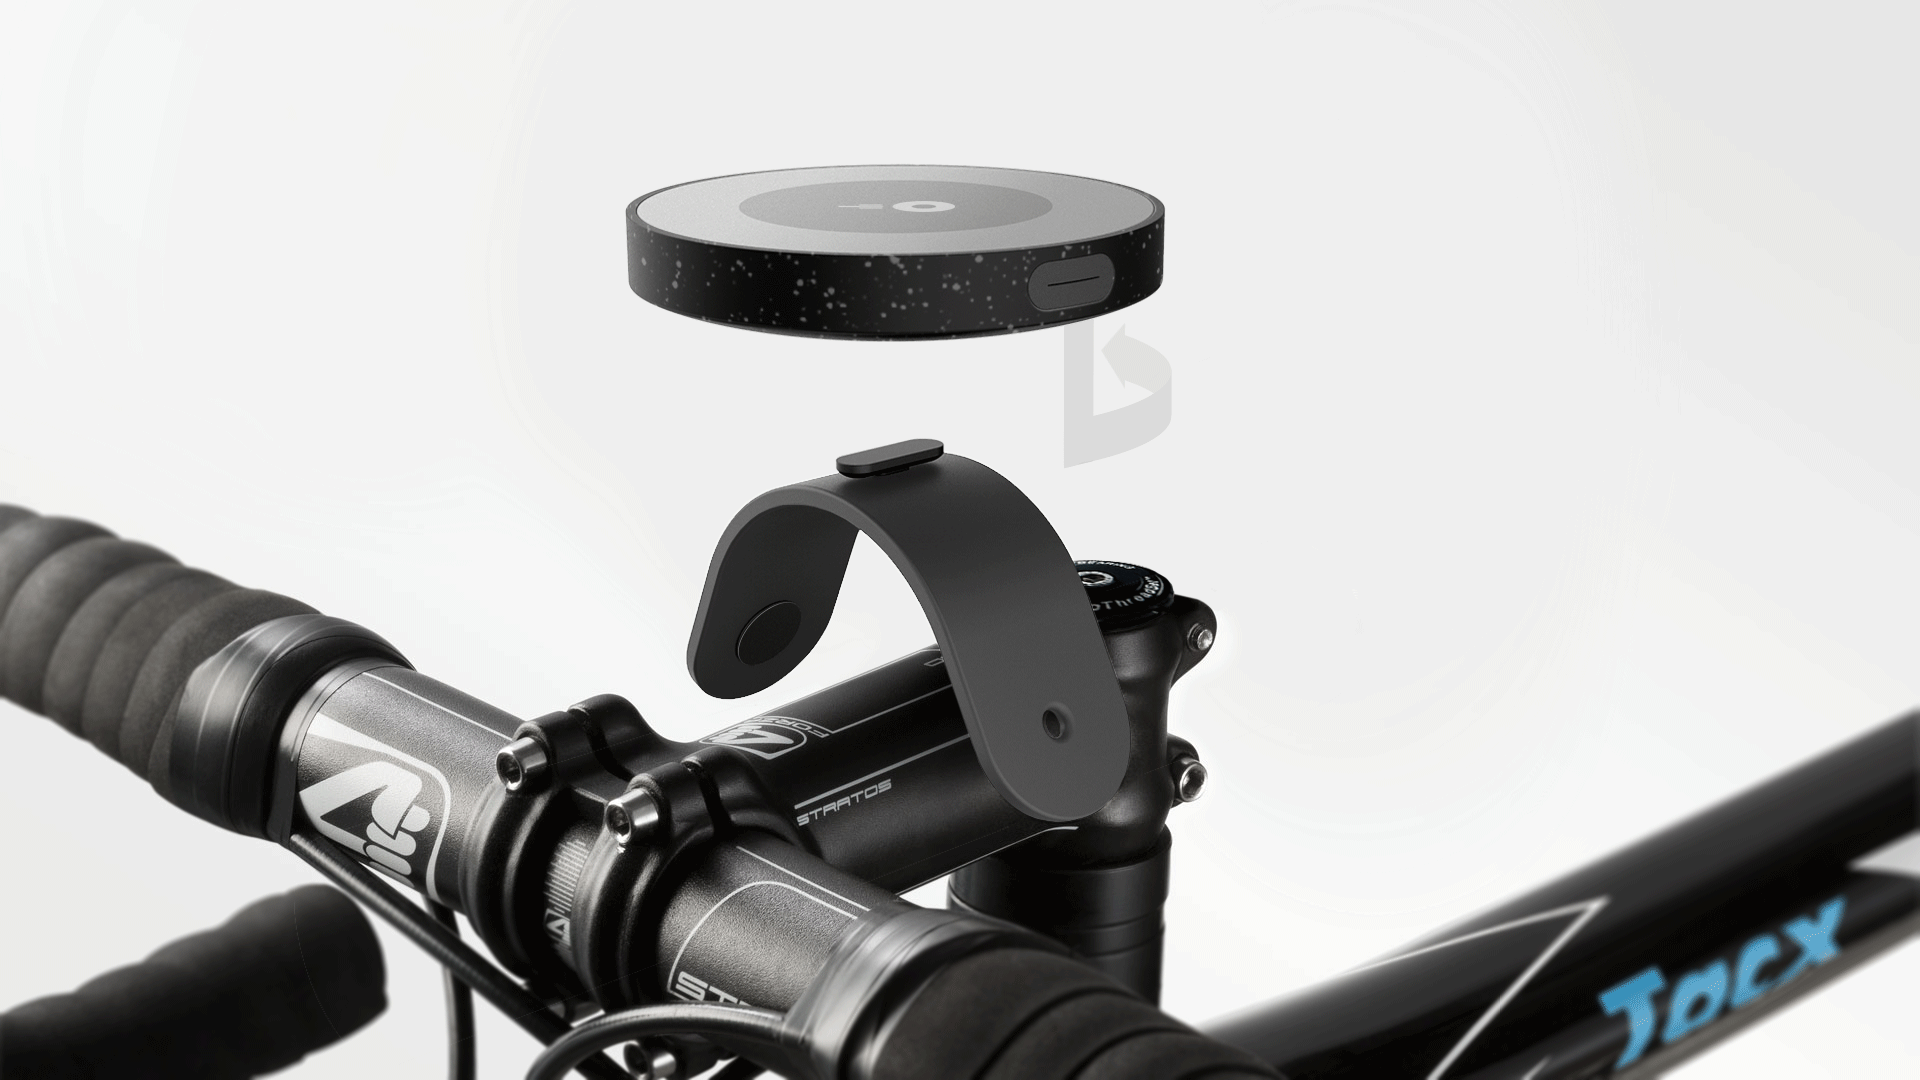 Industrial Design and UI/UX: Orion Cycling Navigation